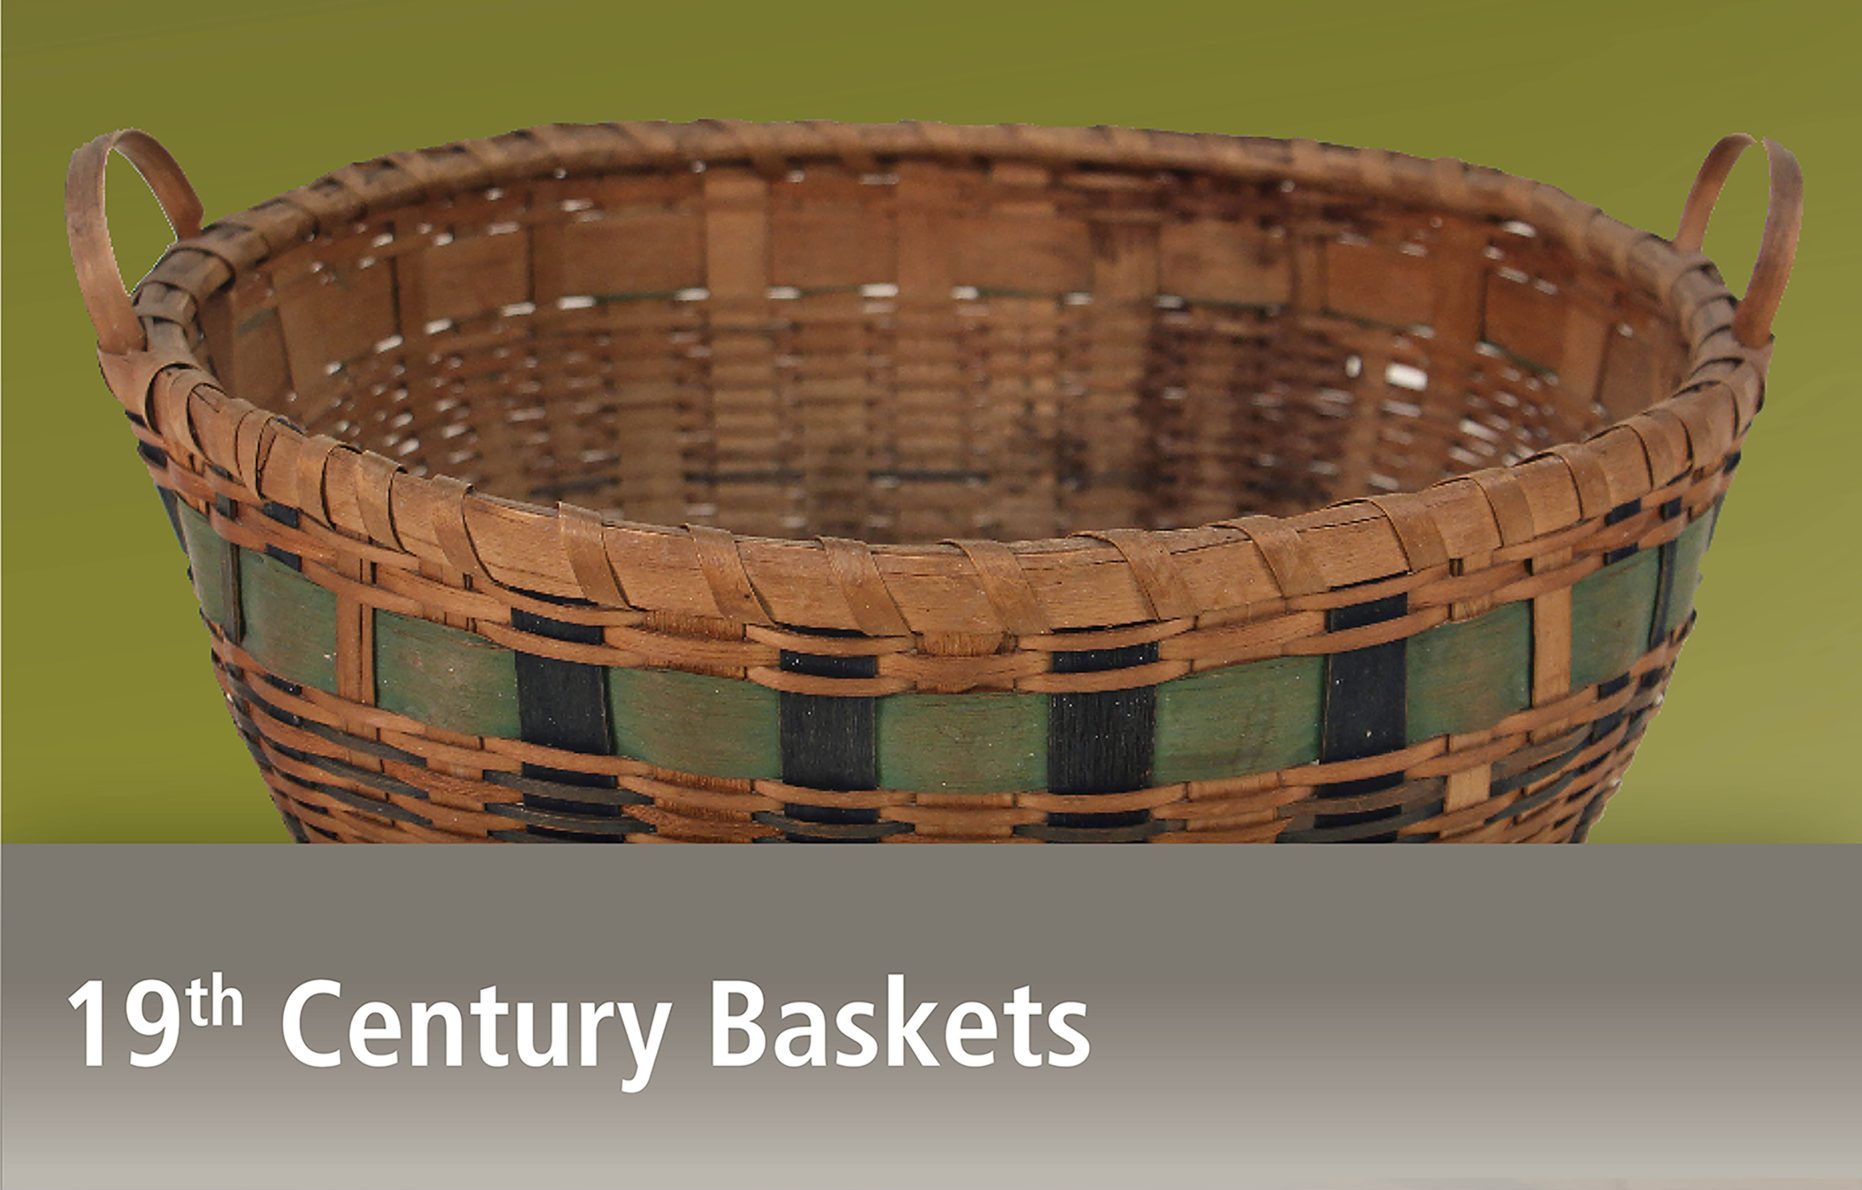 Image of a basket with green and dark blue bands and the title 19th Century Baskets